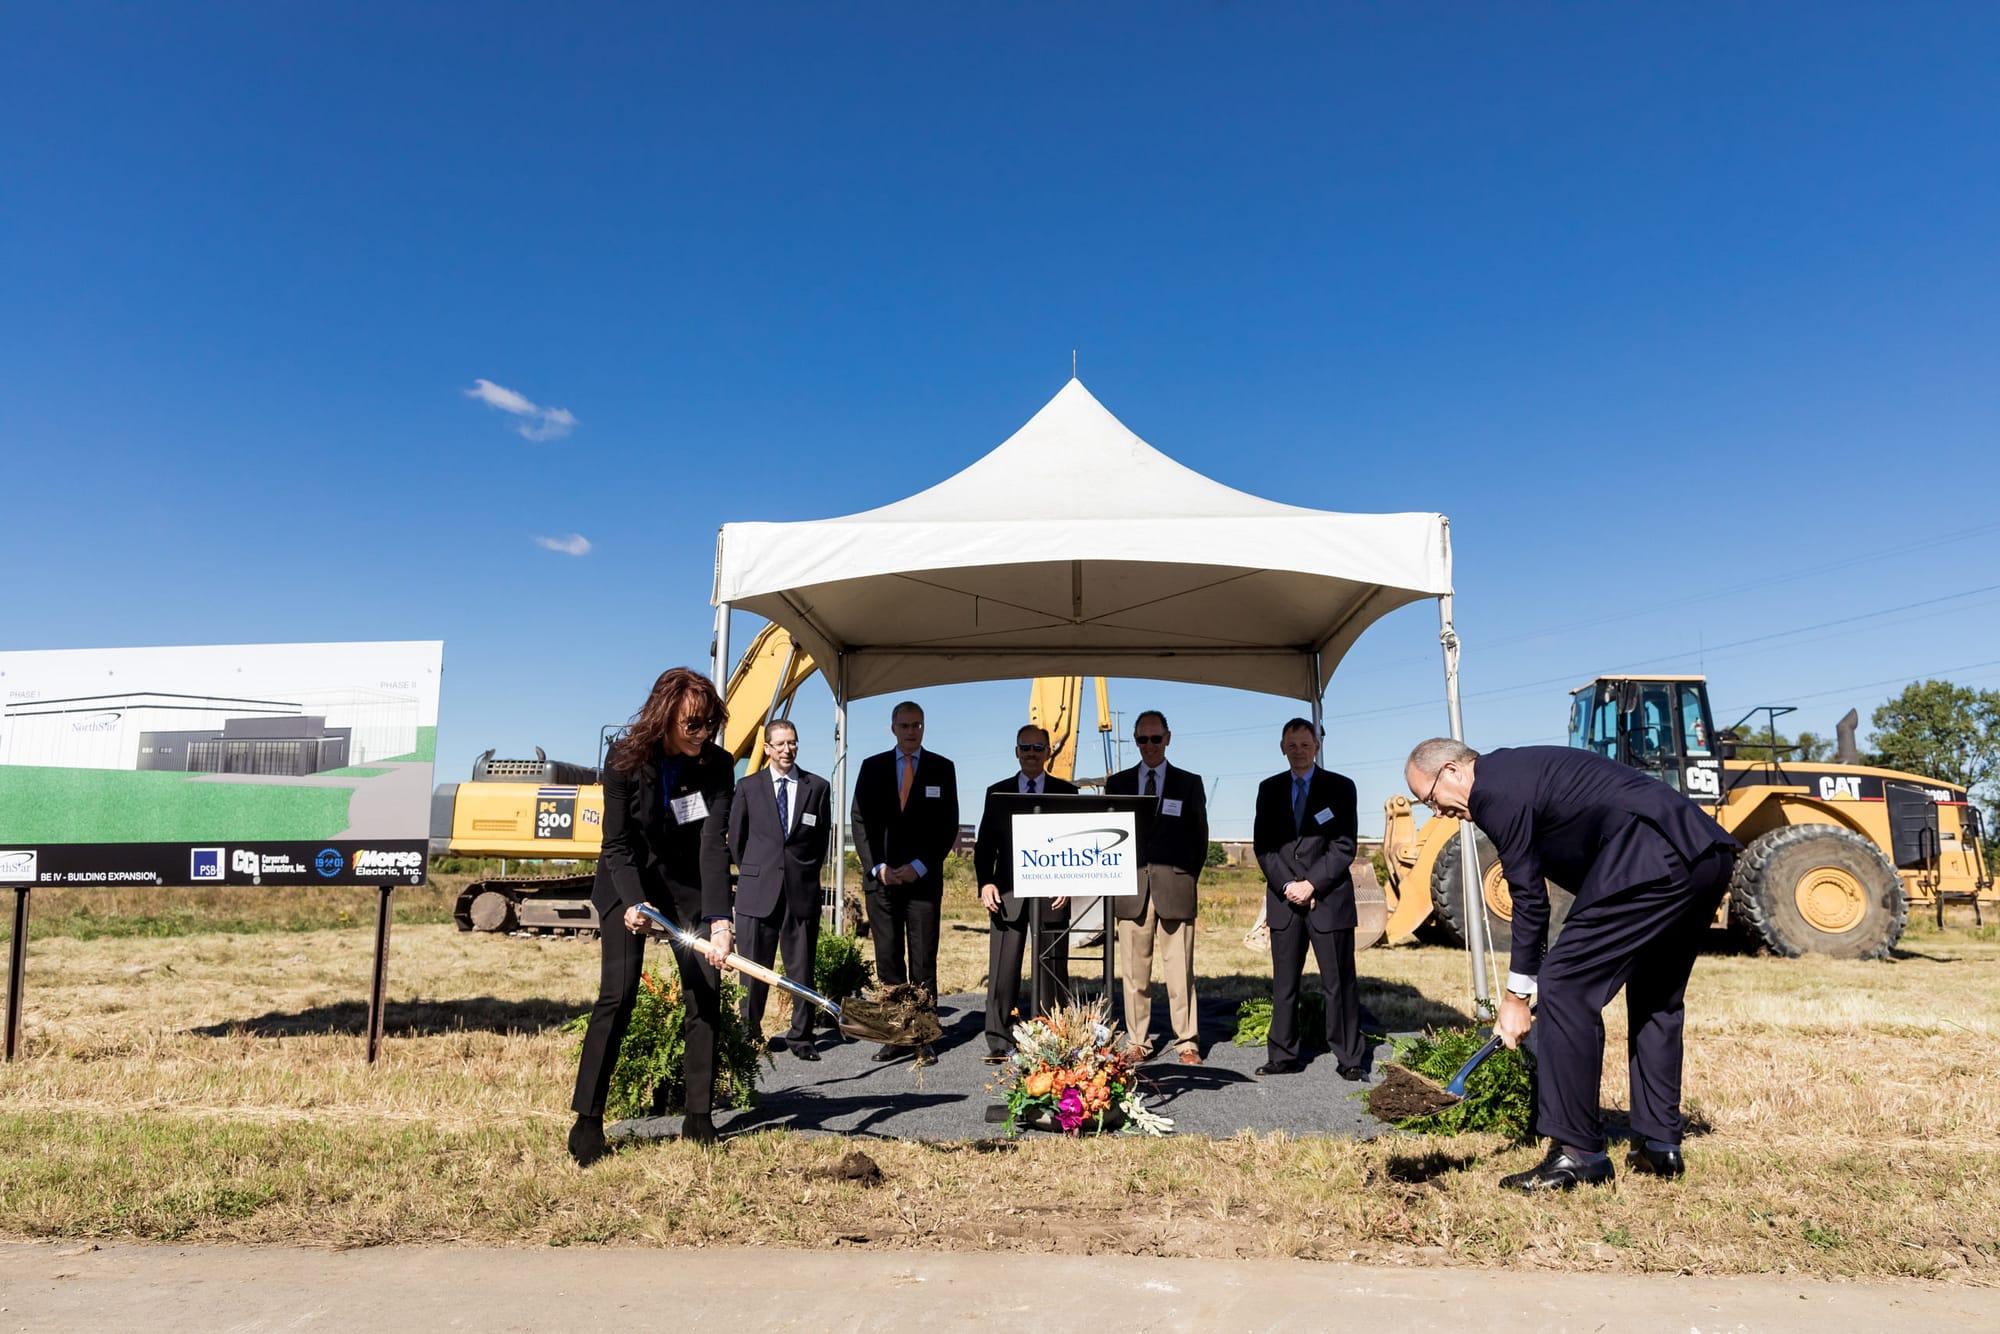 Product NorthStar Medical Radioisotopes Expansion Event Unveils Advanced Radioisotope Production Equipment and Breaks Ground on First-in-Kind Therapeutic Radioisotope Production Facility | NorthStar Medical Radioisotopes, LLC image